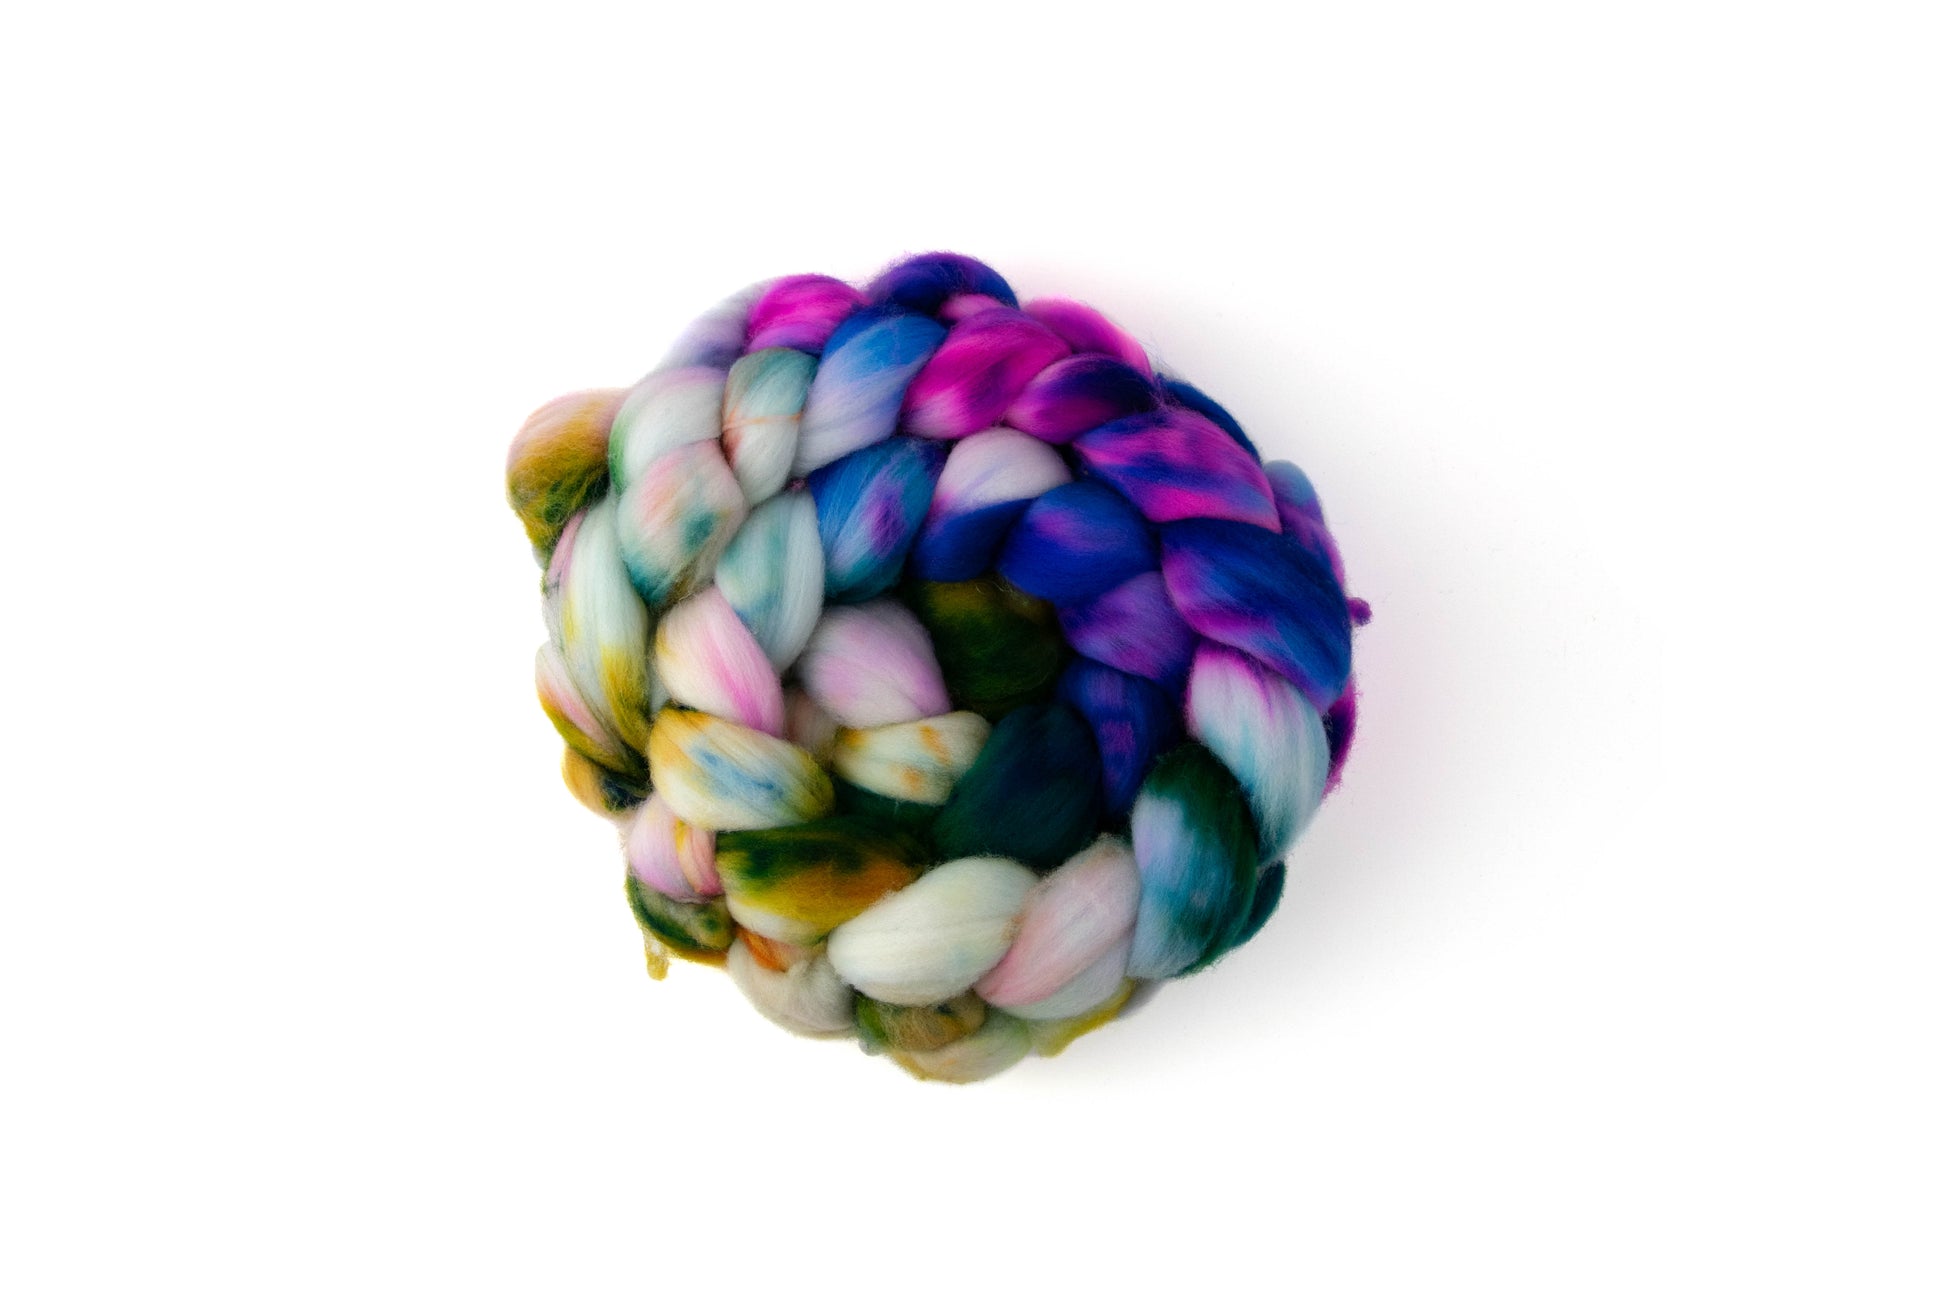 A braid of fiber with blue, pink, purple, yellow, green, and white.